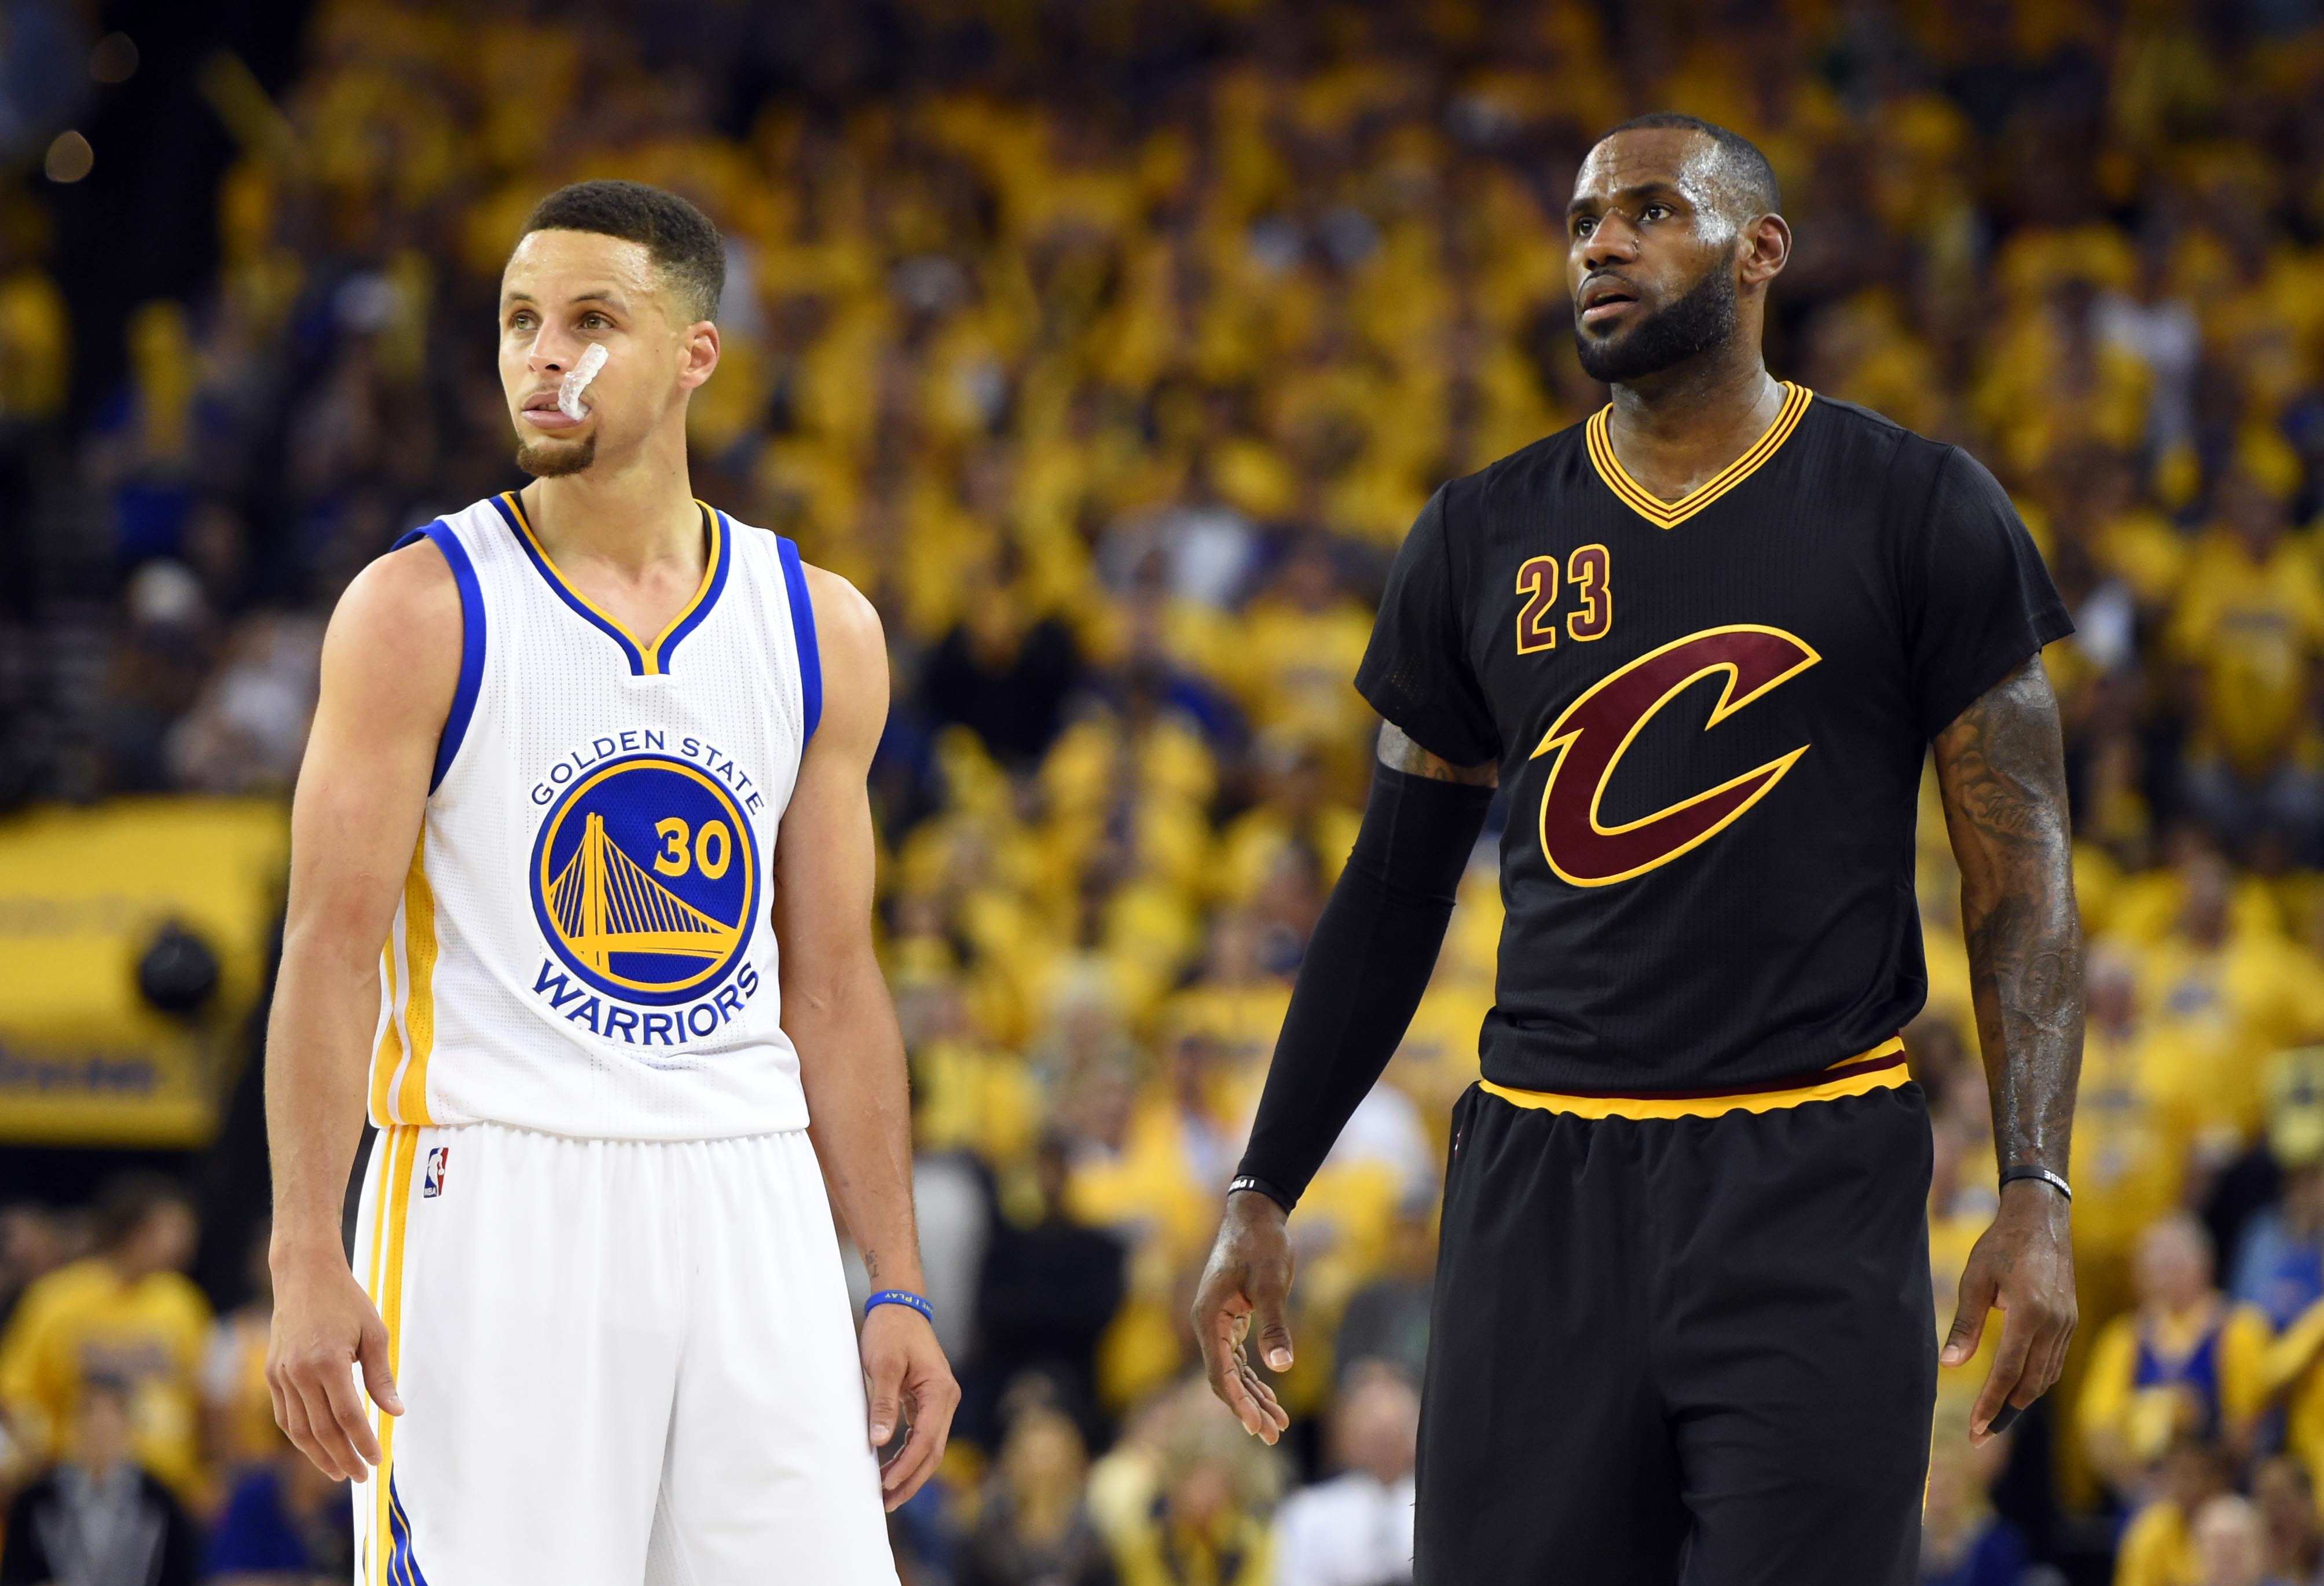 Jun 13, 2016; Oakland, CA, USA; Cleveland Cavaliers forward LeBron James (23) and Golden State Warriors guard Stephen Curry (30) during the third quarter in game five of the NBA Finals at Oracle Arena. Mandatory Credit: Bob Donnan-USA TODAY Sports